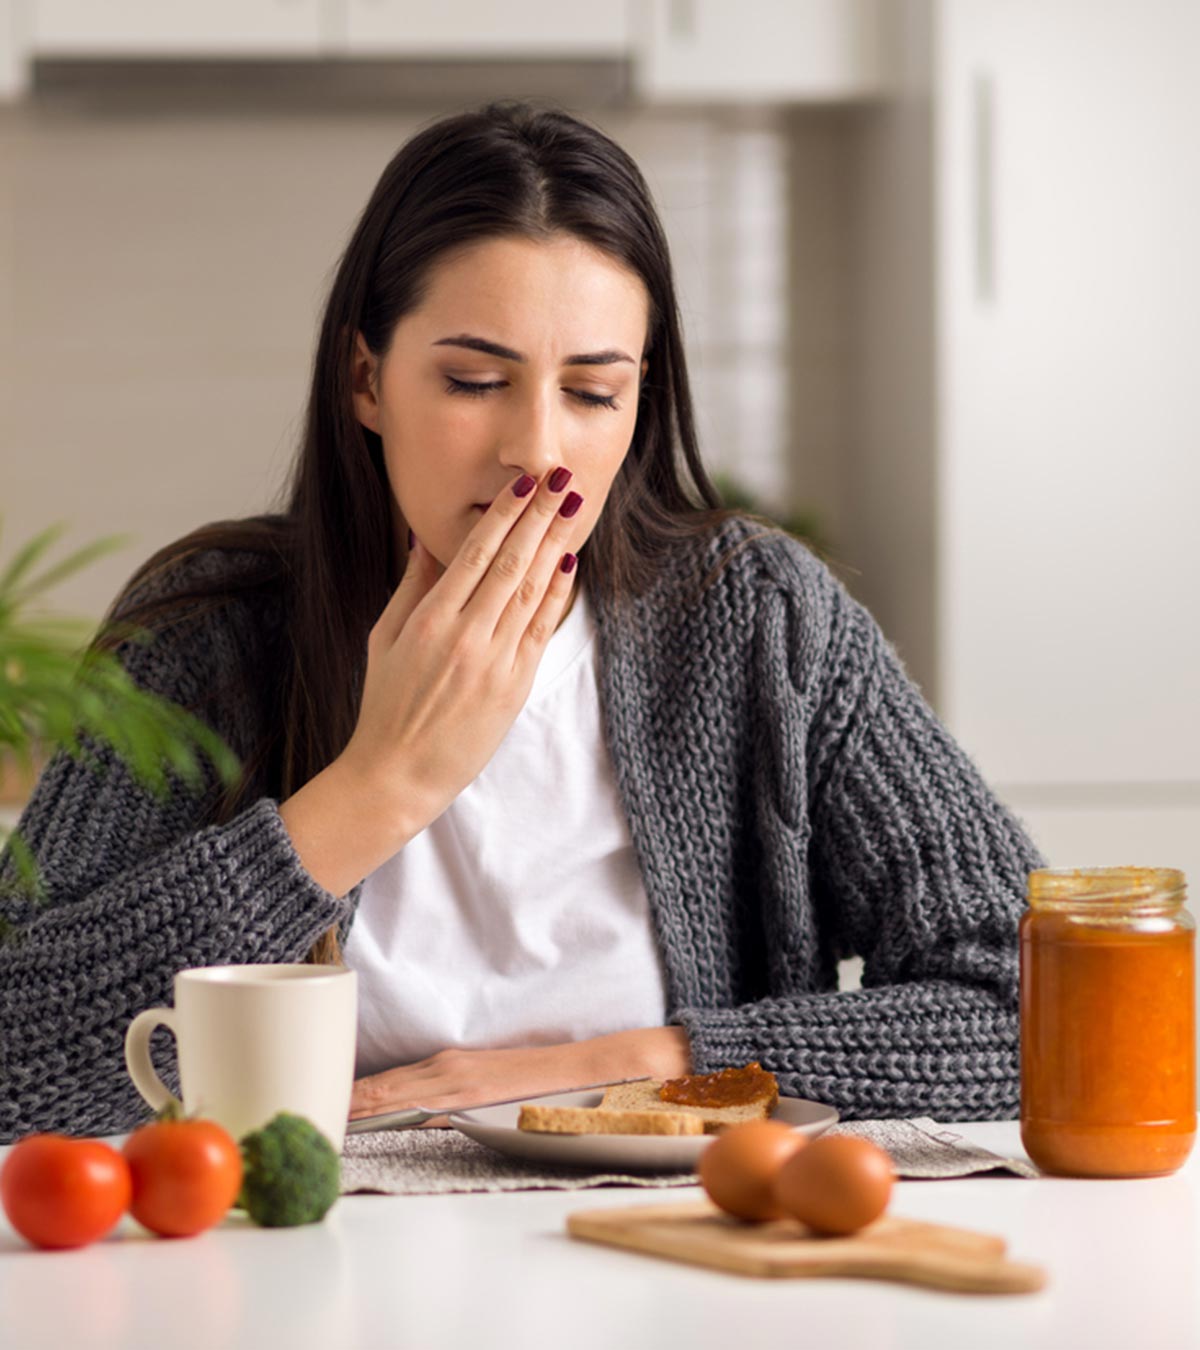 What To Eat If You’re Experiencing Morning Sickness